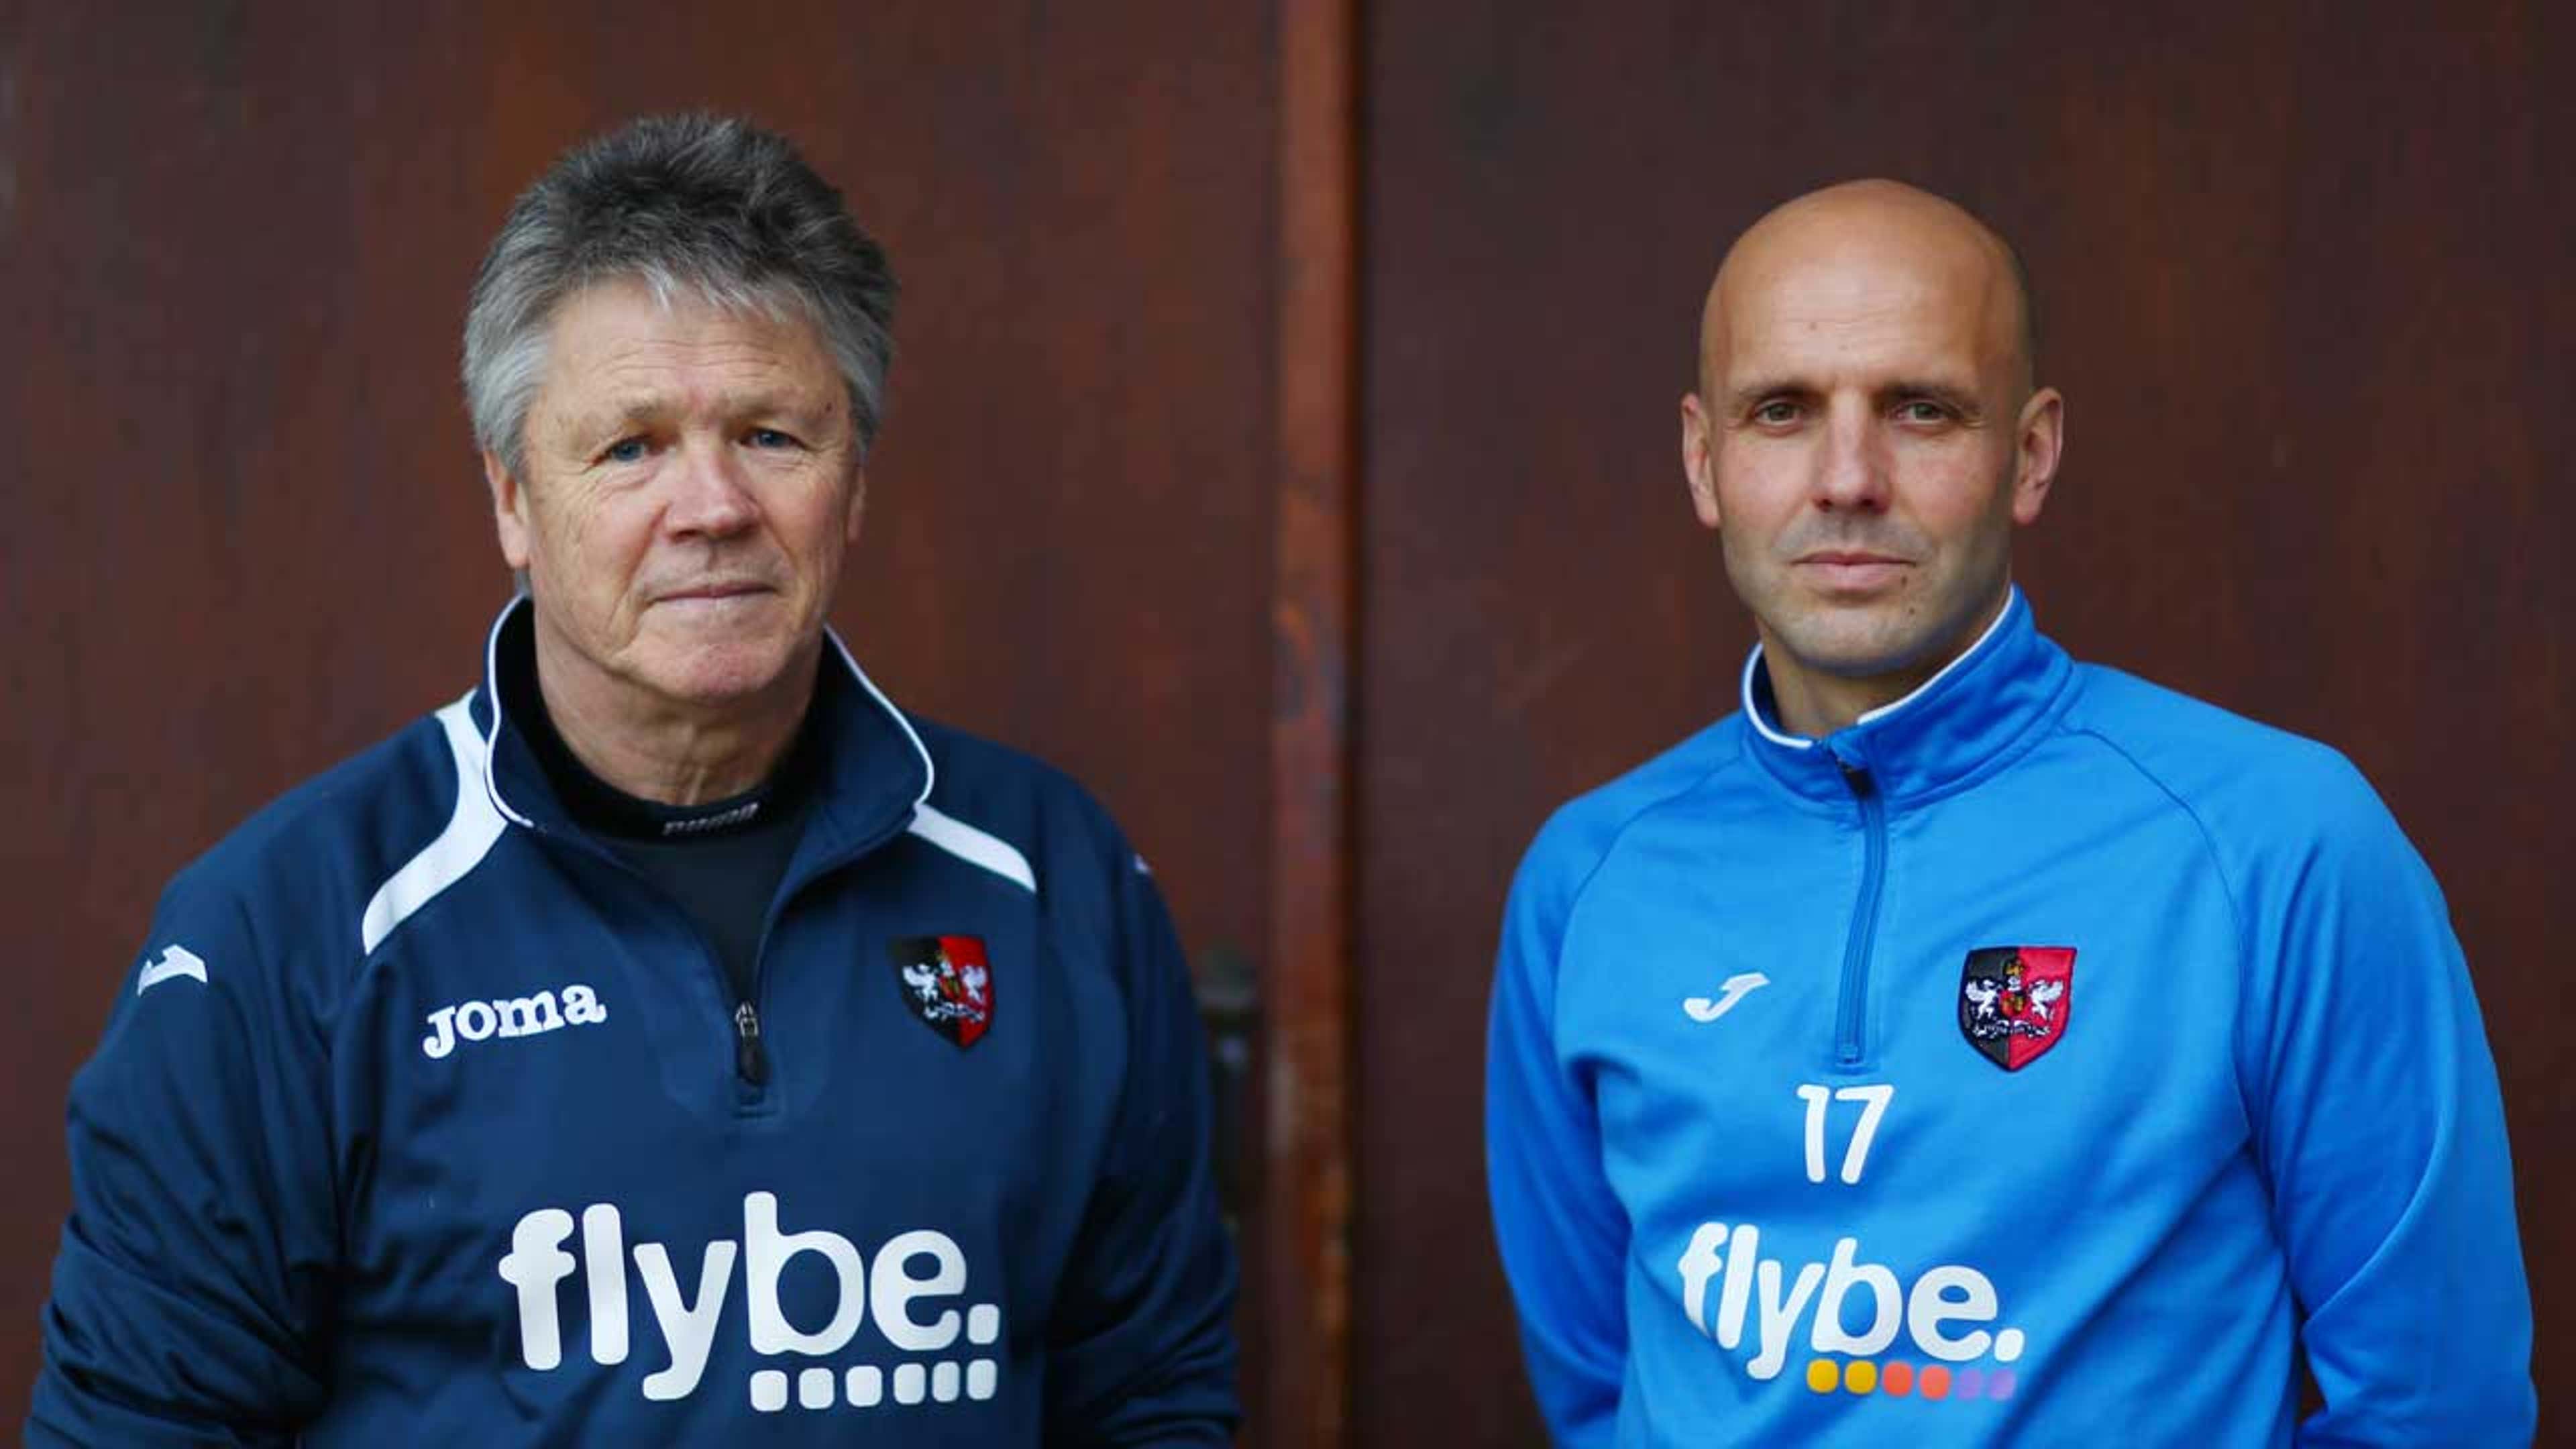 Paul Tisdale and Steve Perryman